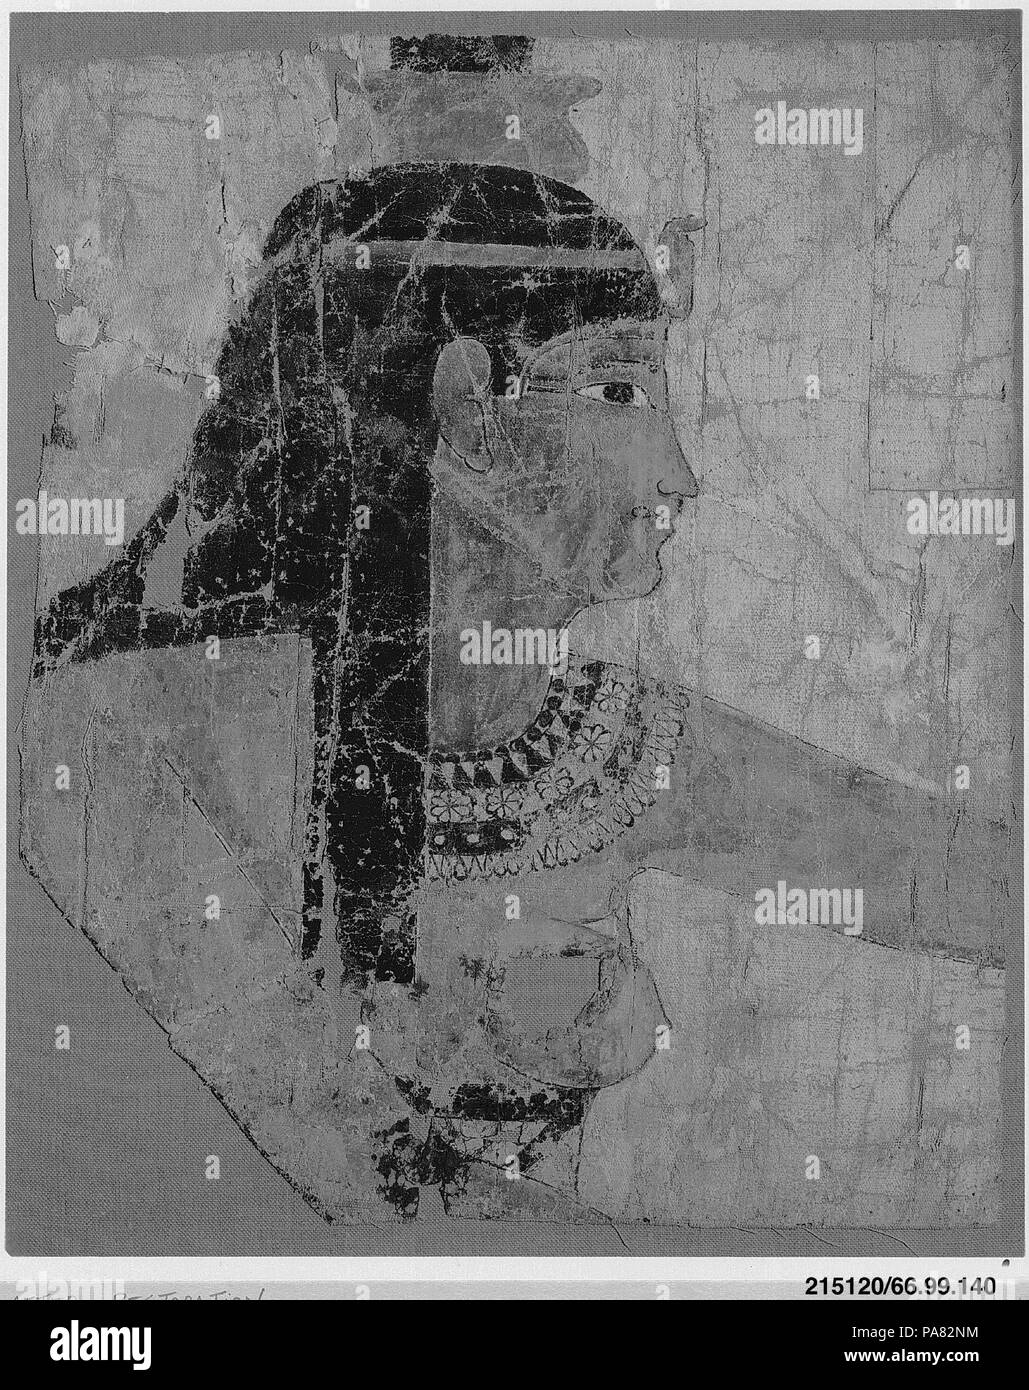 Painted Shroud Fragment. Dimensions: H. 38 cm (14 15/16 in); W. 30.2 cm (11 7/8 in); Framed: H. 44 cm (17 5/16 in.); W. 36 cm (14 3/16 in.); D. 4.4 cm (1 3/4 in.). Date: 1st century BC-1st century AD.  As wife and sister of Osiris, Isis and Nephthys were twinned in funerary beliefs. These heads of the two goddesses, 66.99.140 and 66.99.141,  come from a single linen shroud, which probably showed them raising their arms in a gesture of care and reverence on either side of the frontal, mummified image of Osiris. When wrapped about the mummy, the images on the shroud would have identified the dec Stock Photo